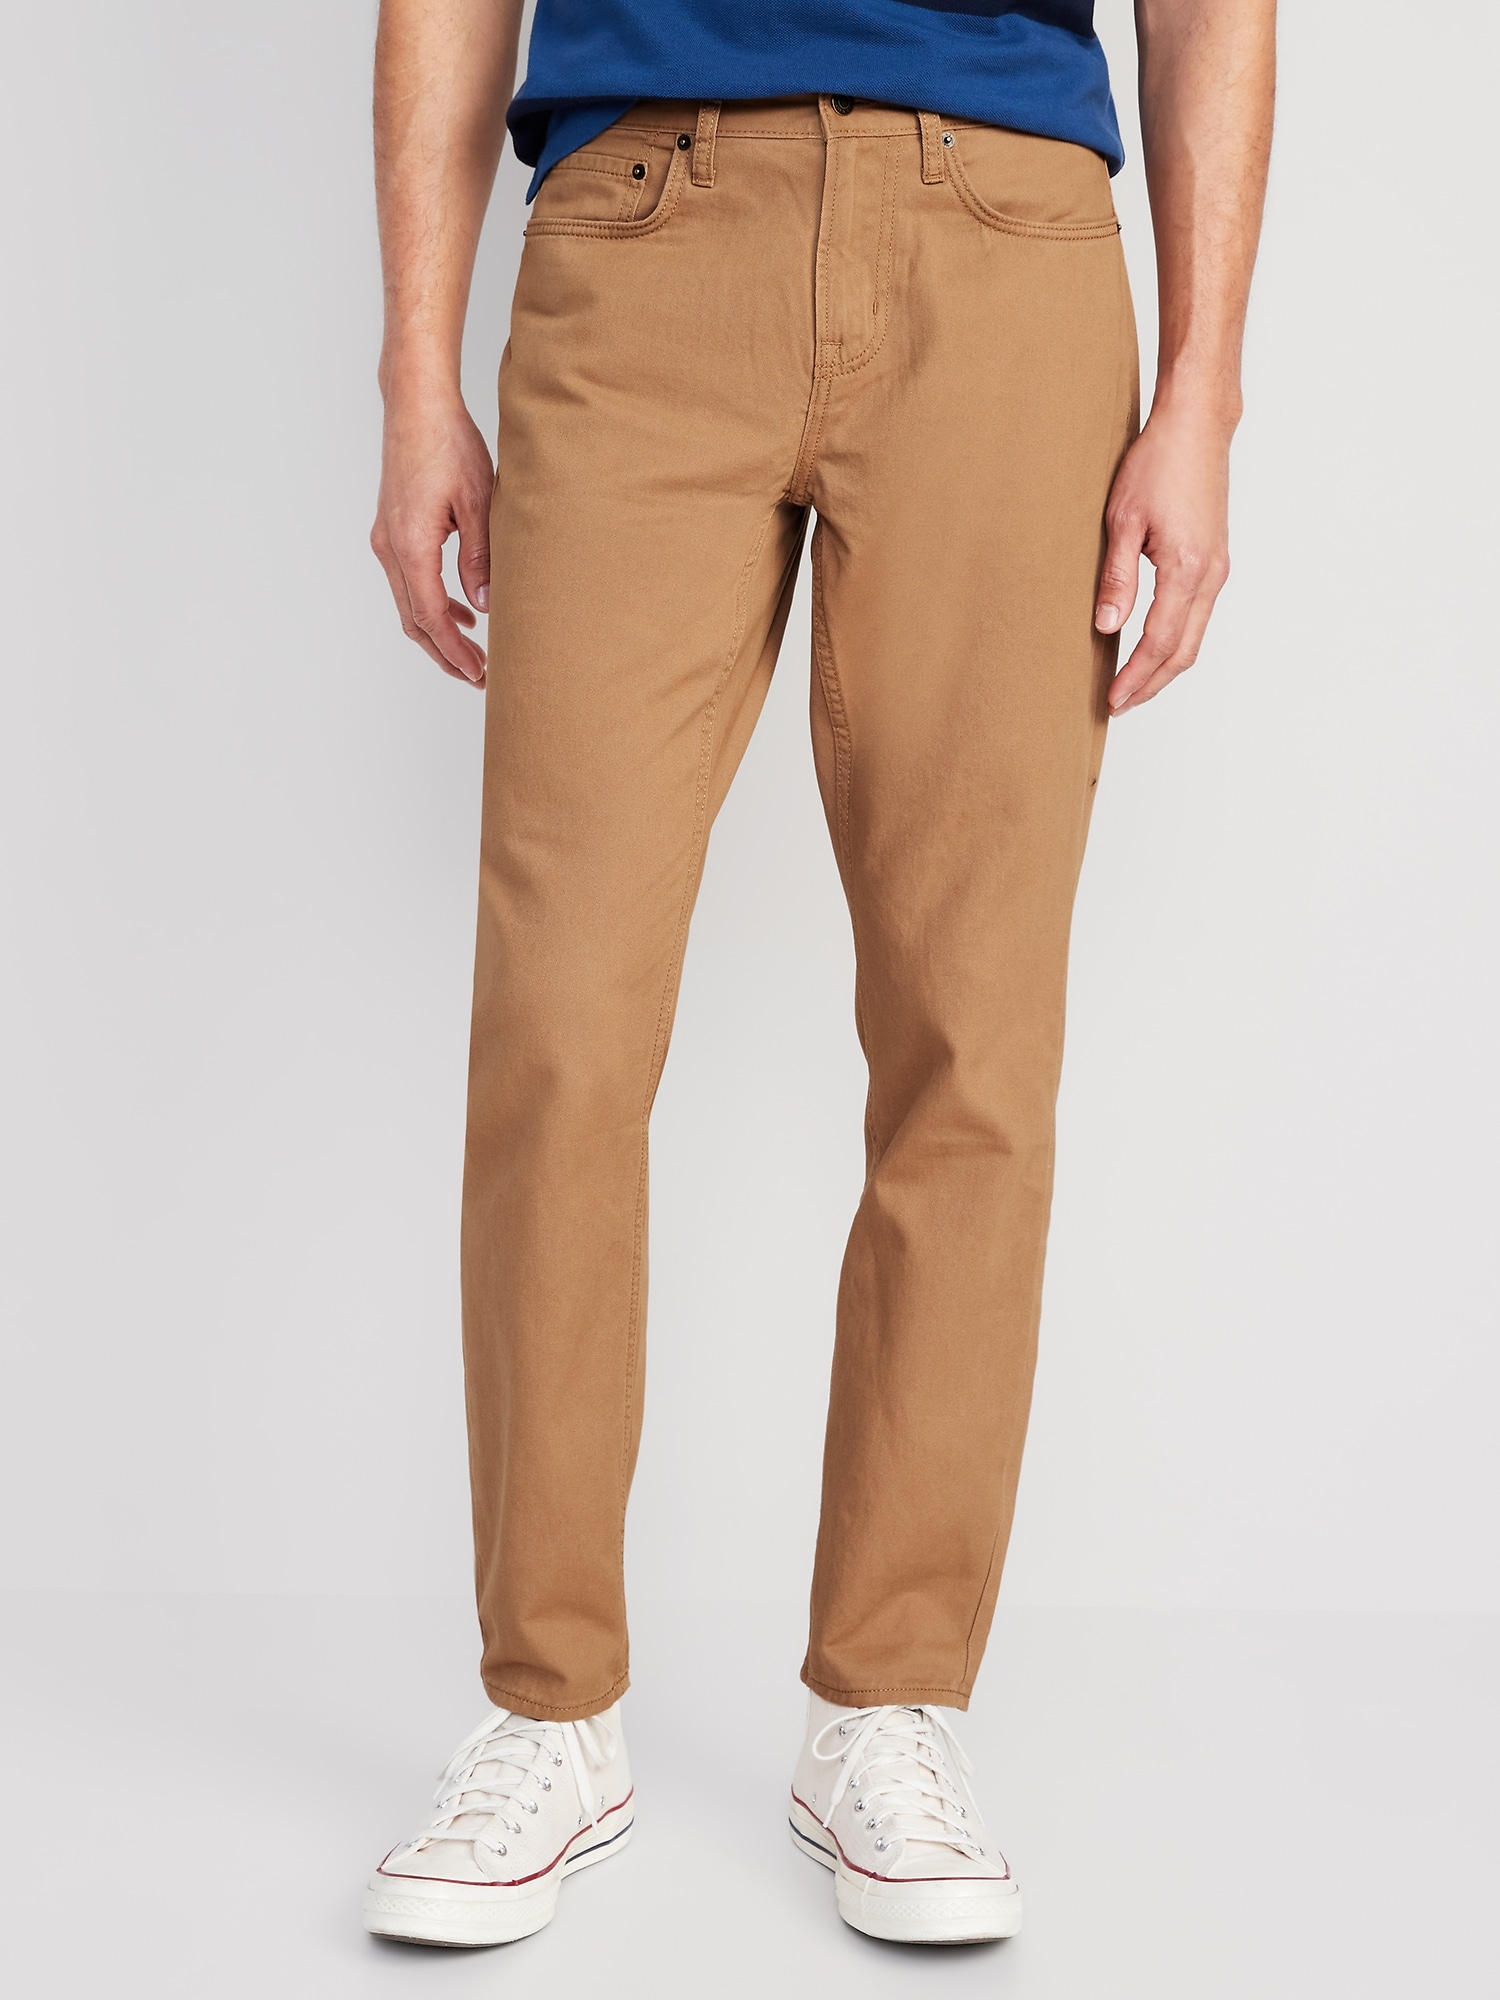 Wow Athletic Taper Non-Stretch Five-Pocket Pants | Old Navy